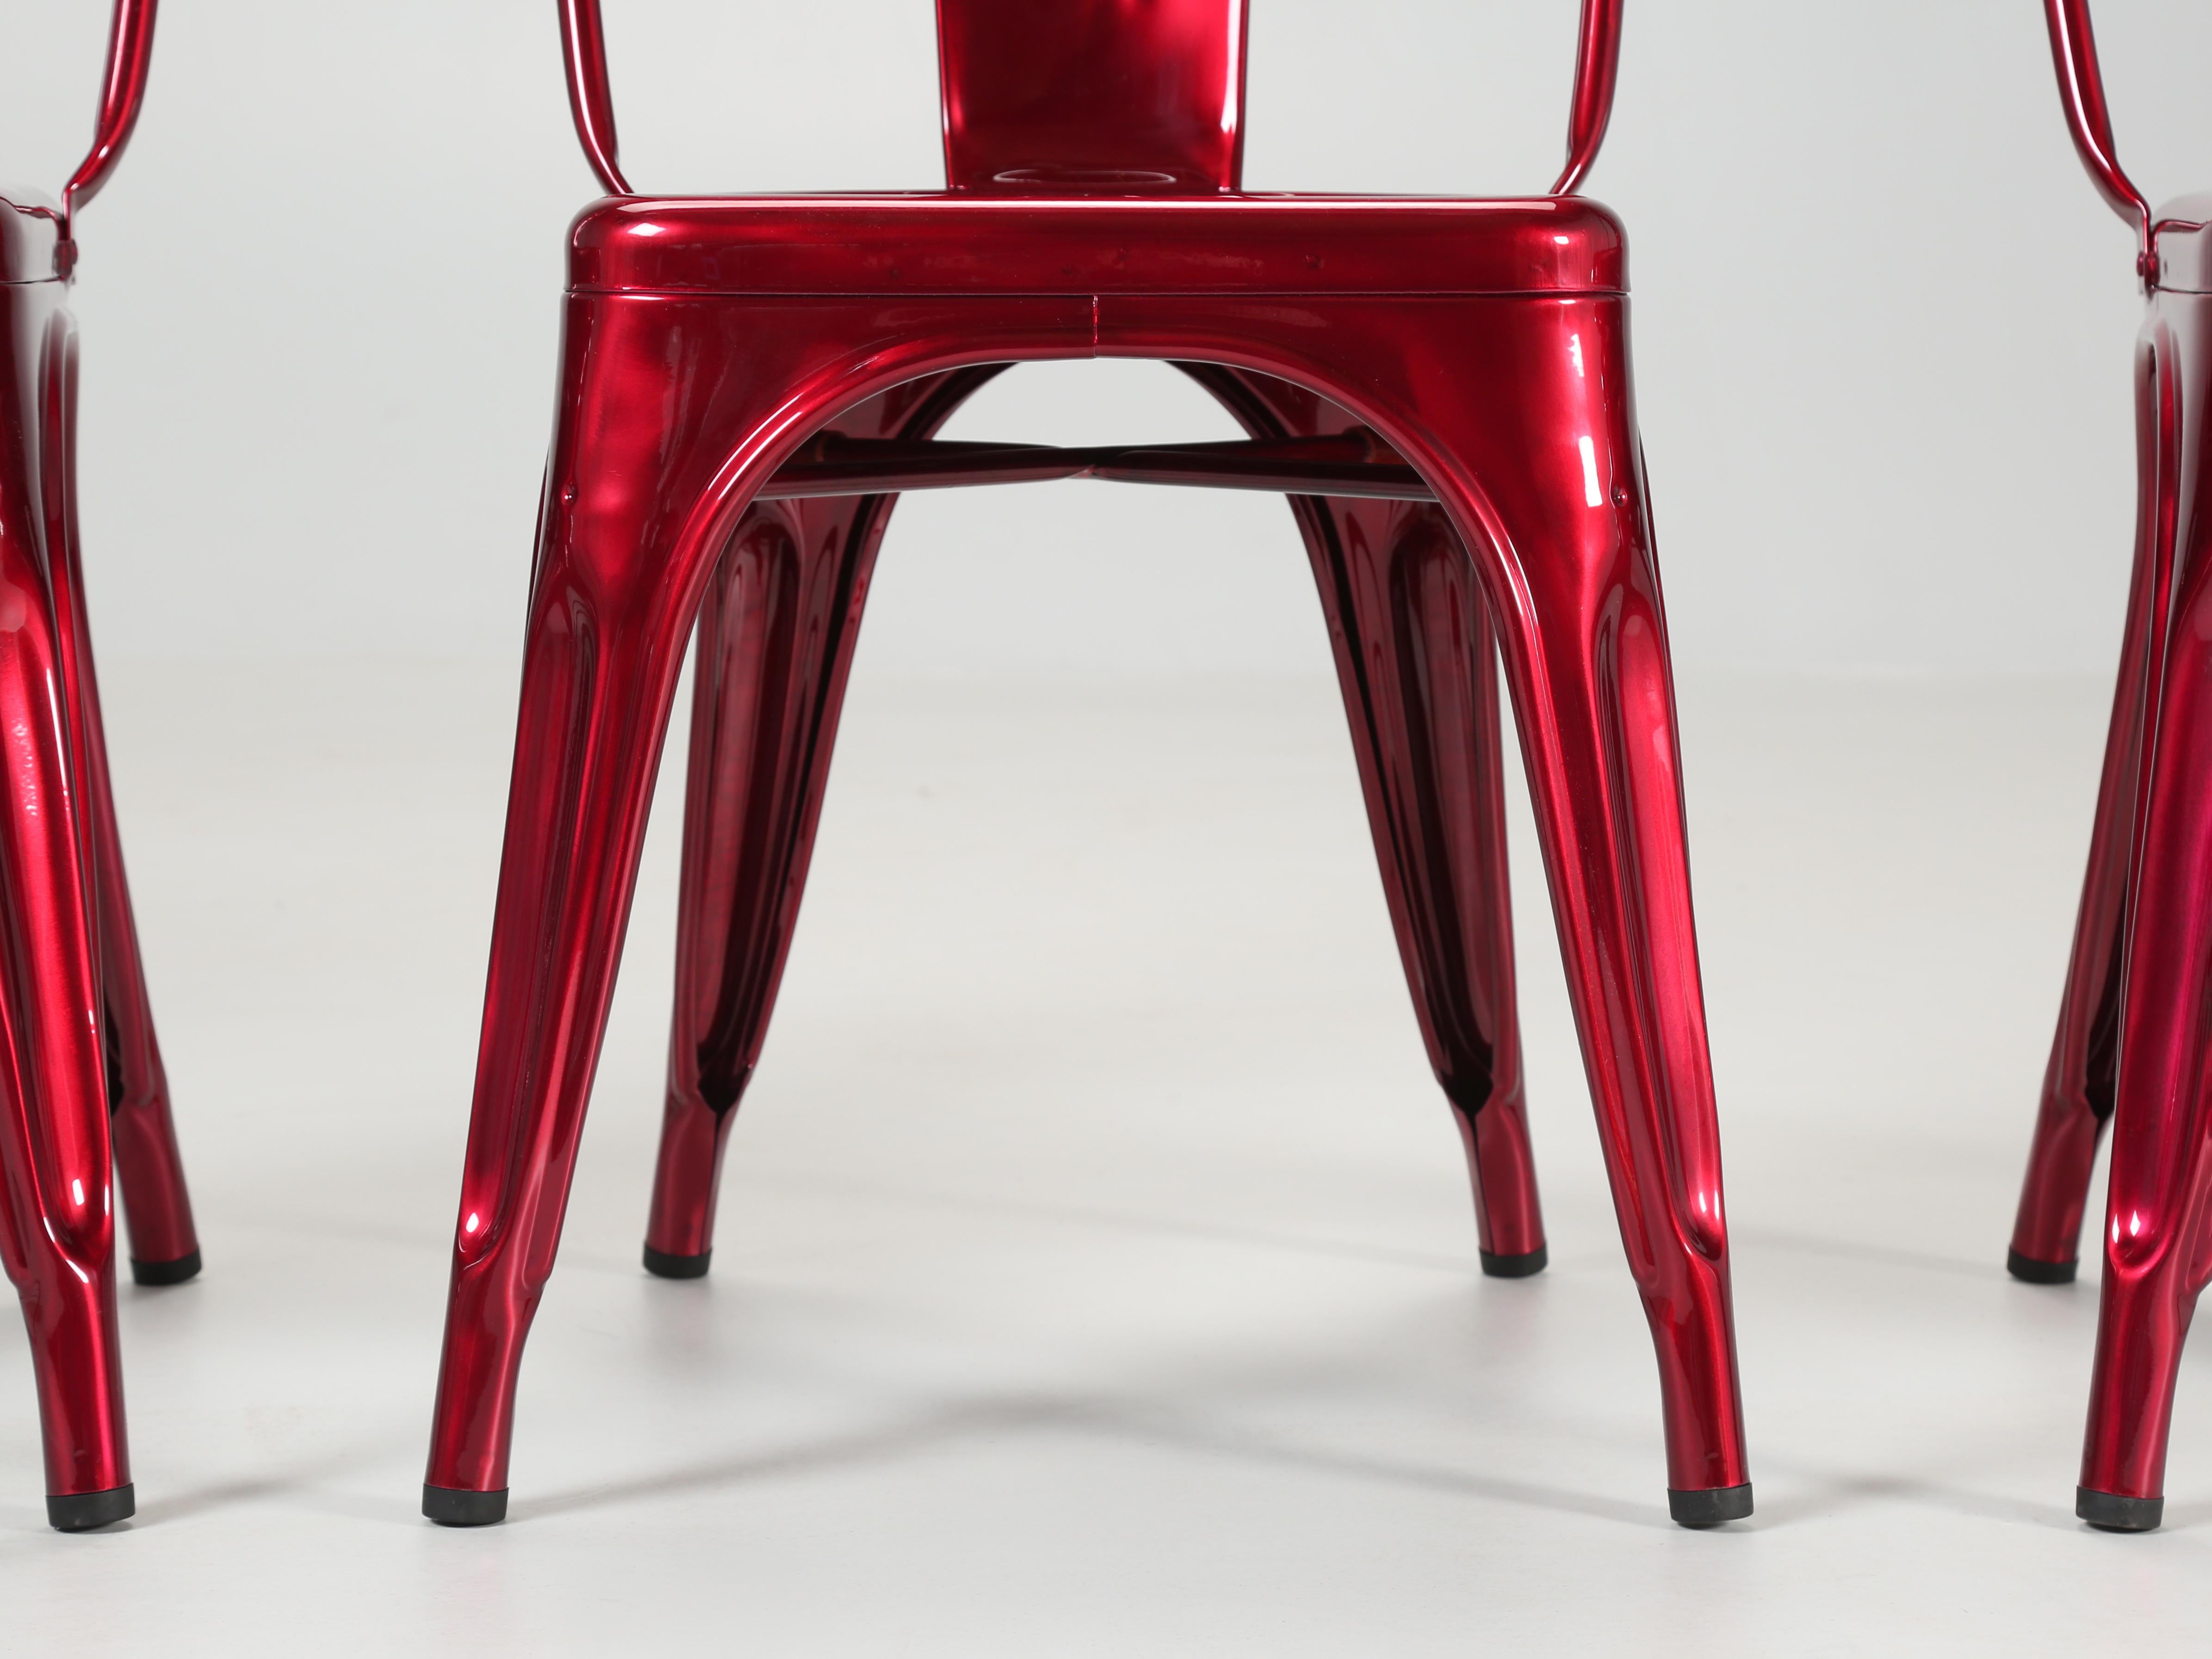 Tolix Set of (4) Steel Stacking Chairs in a Brilliant Candy Apple Red Metallic 3